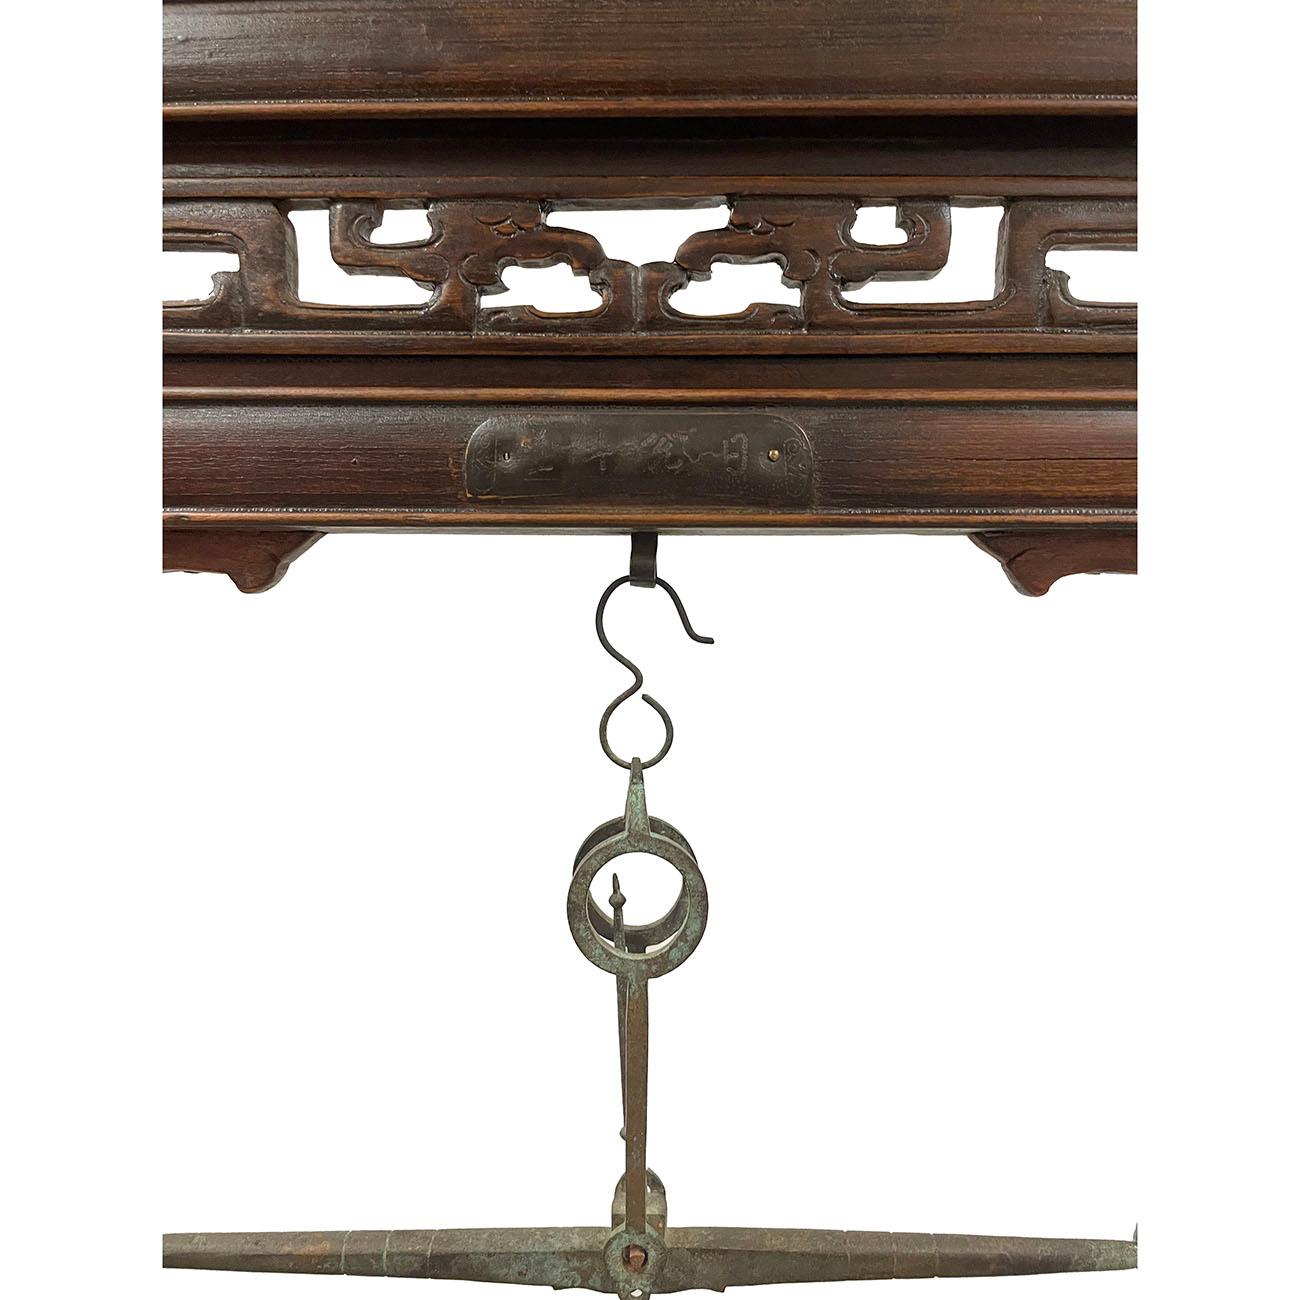 Chinese Export 19th Century Antique Chinese Apothecary Balance Scale Stand with Weights For Sale